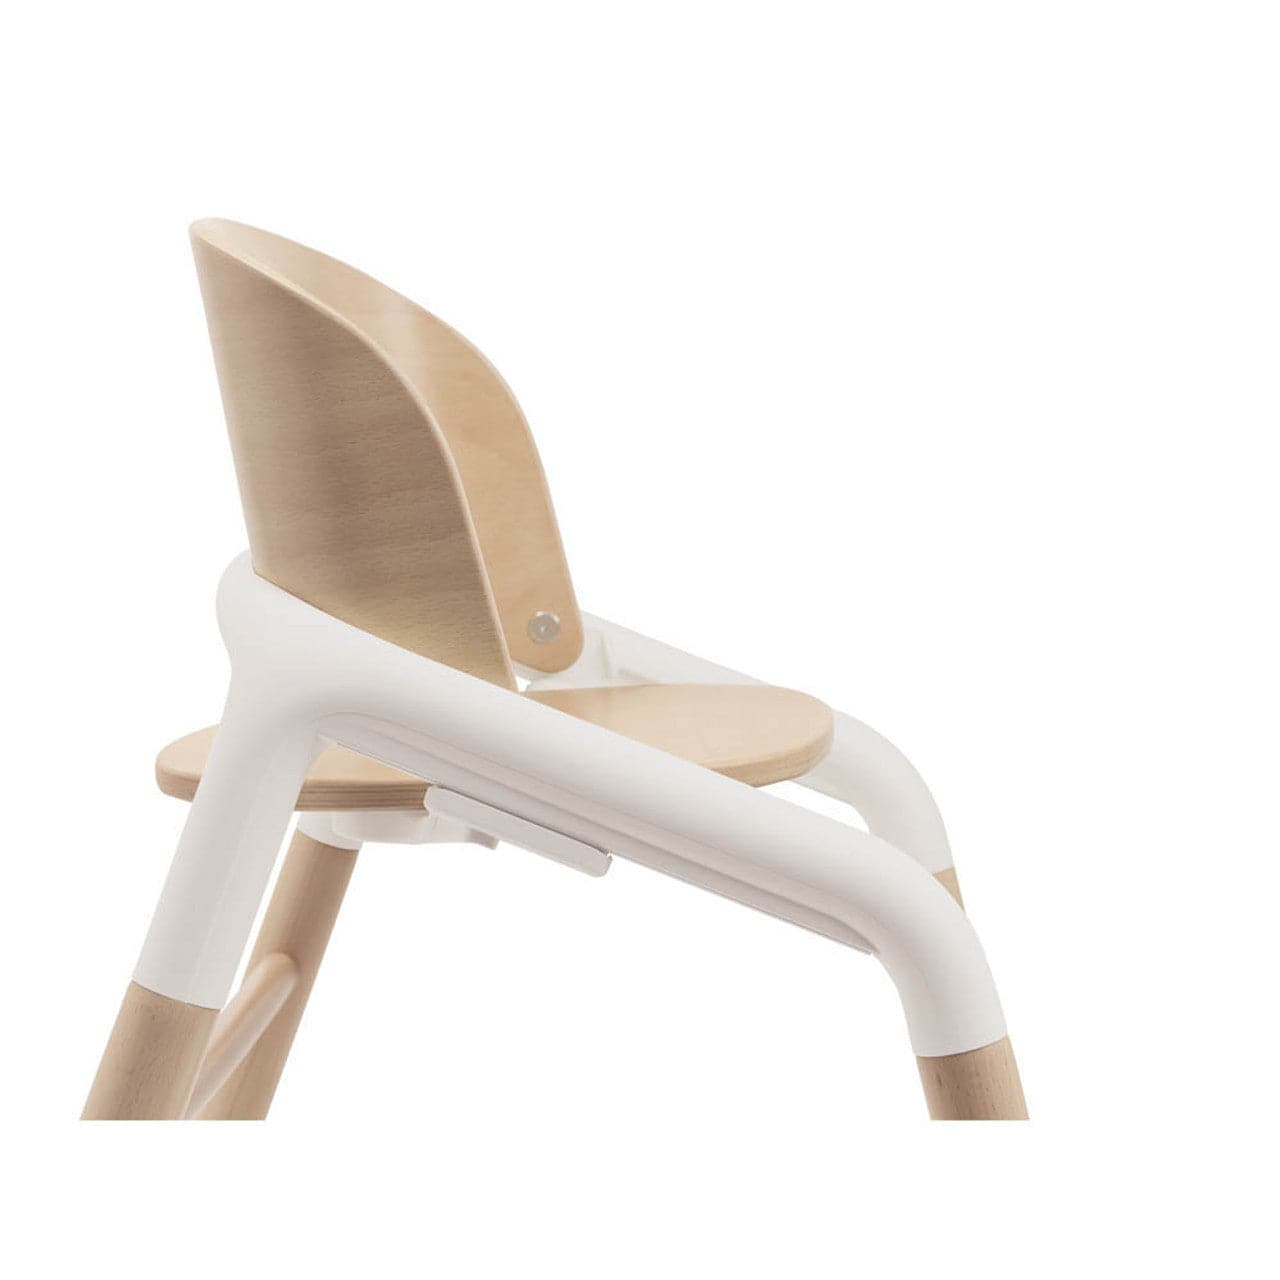 Bugaboo Giraffe Highchair Baby Bundle - Neutral Wood/White - For Your Little One